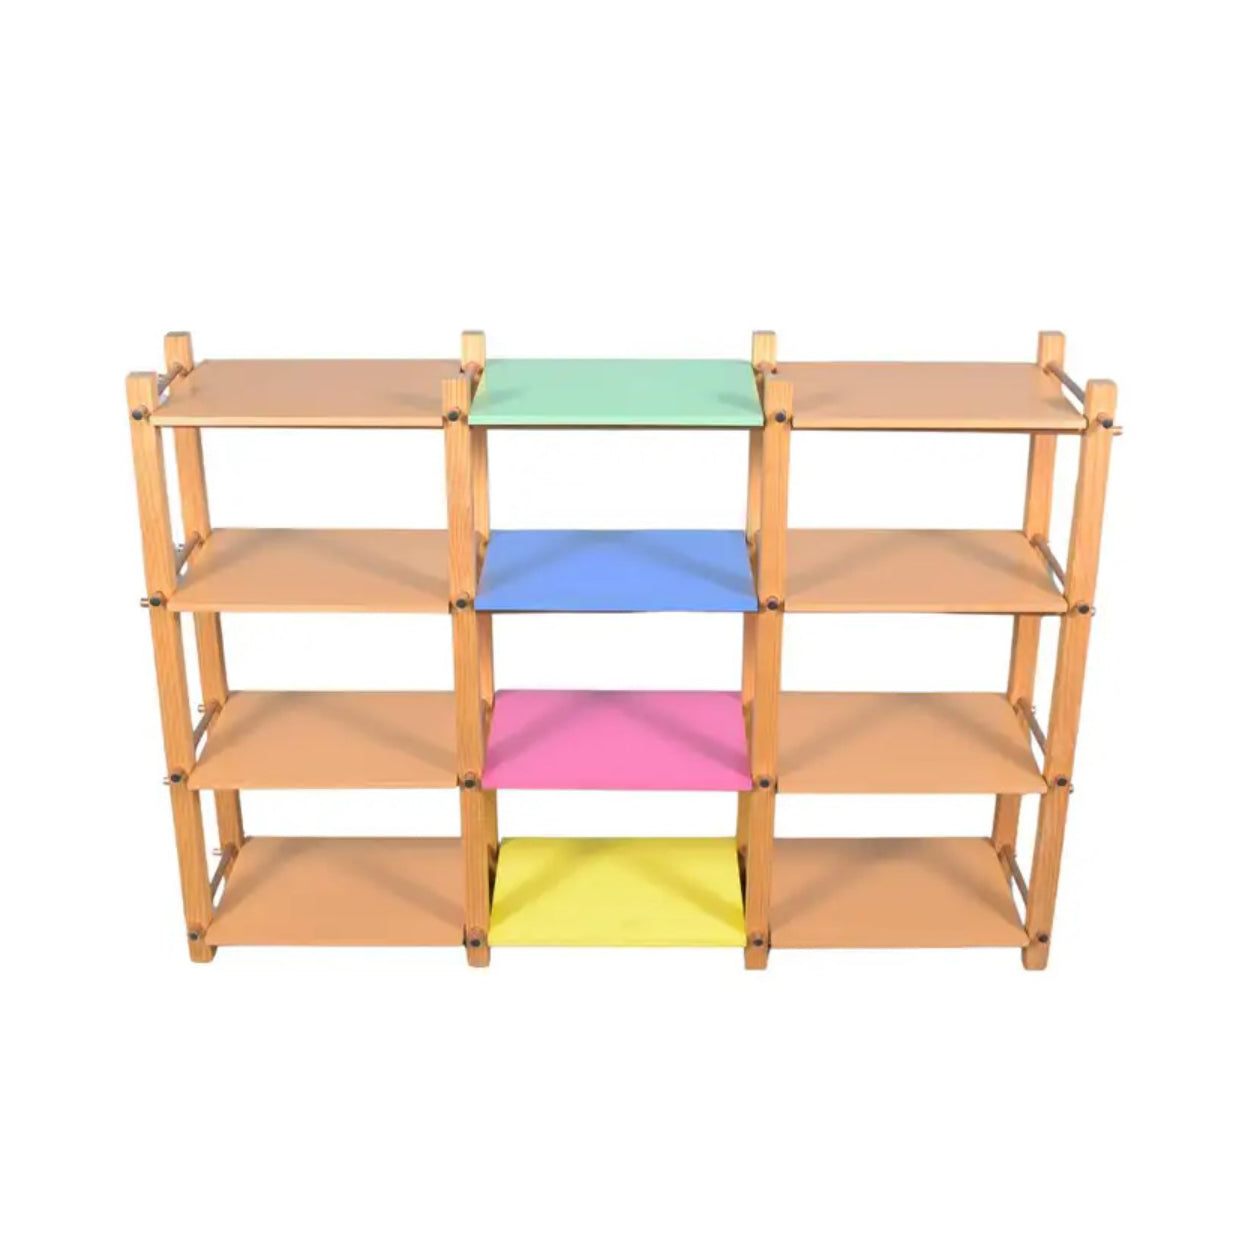 Arts & Crafts Open Bookshelf: Mid-Century Modern Design with Colorful Shelves